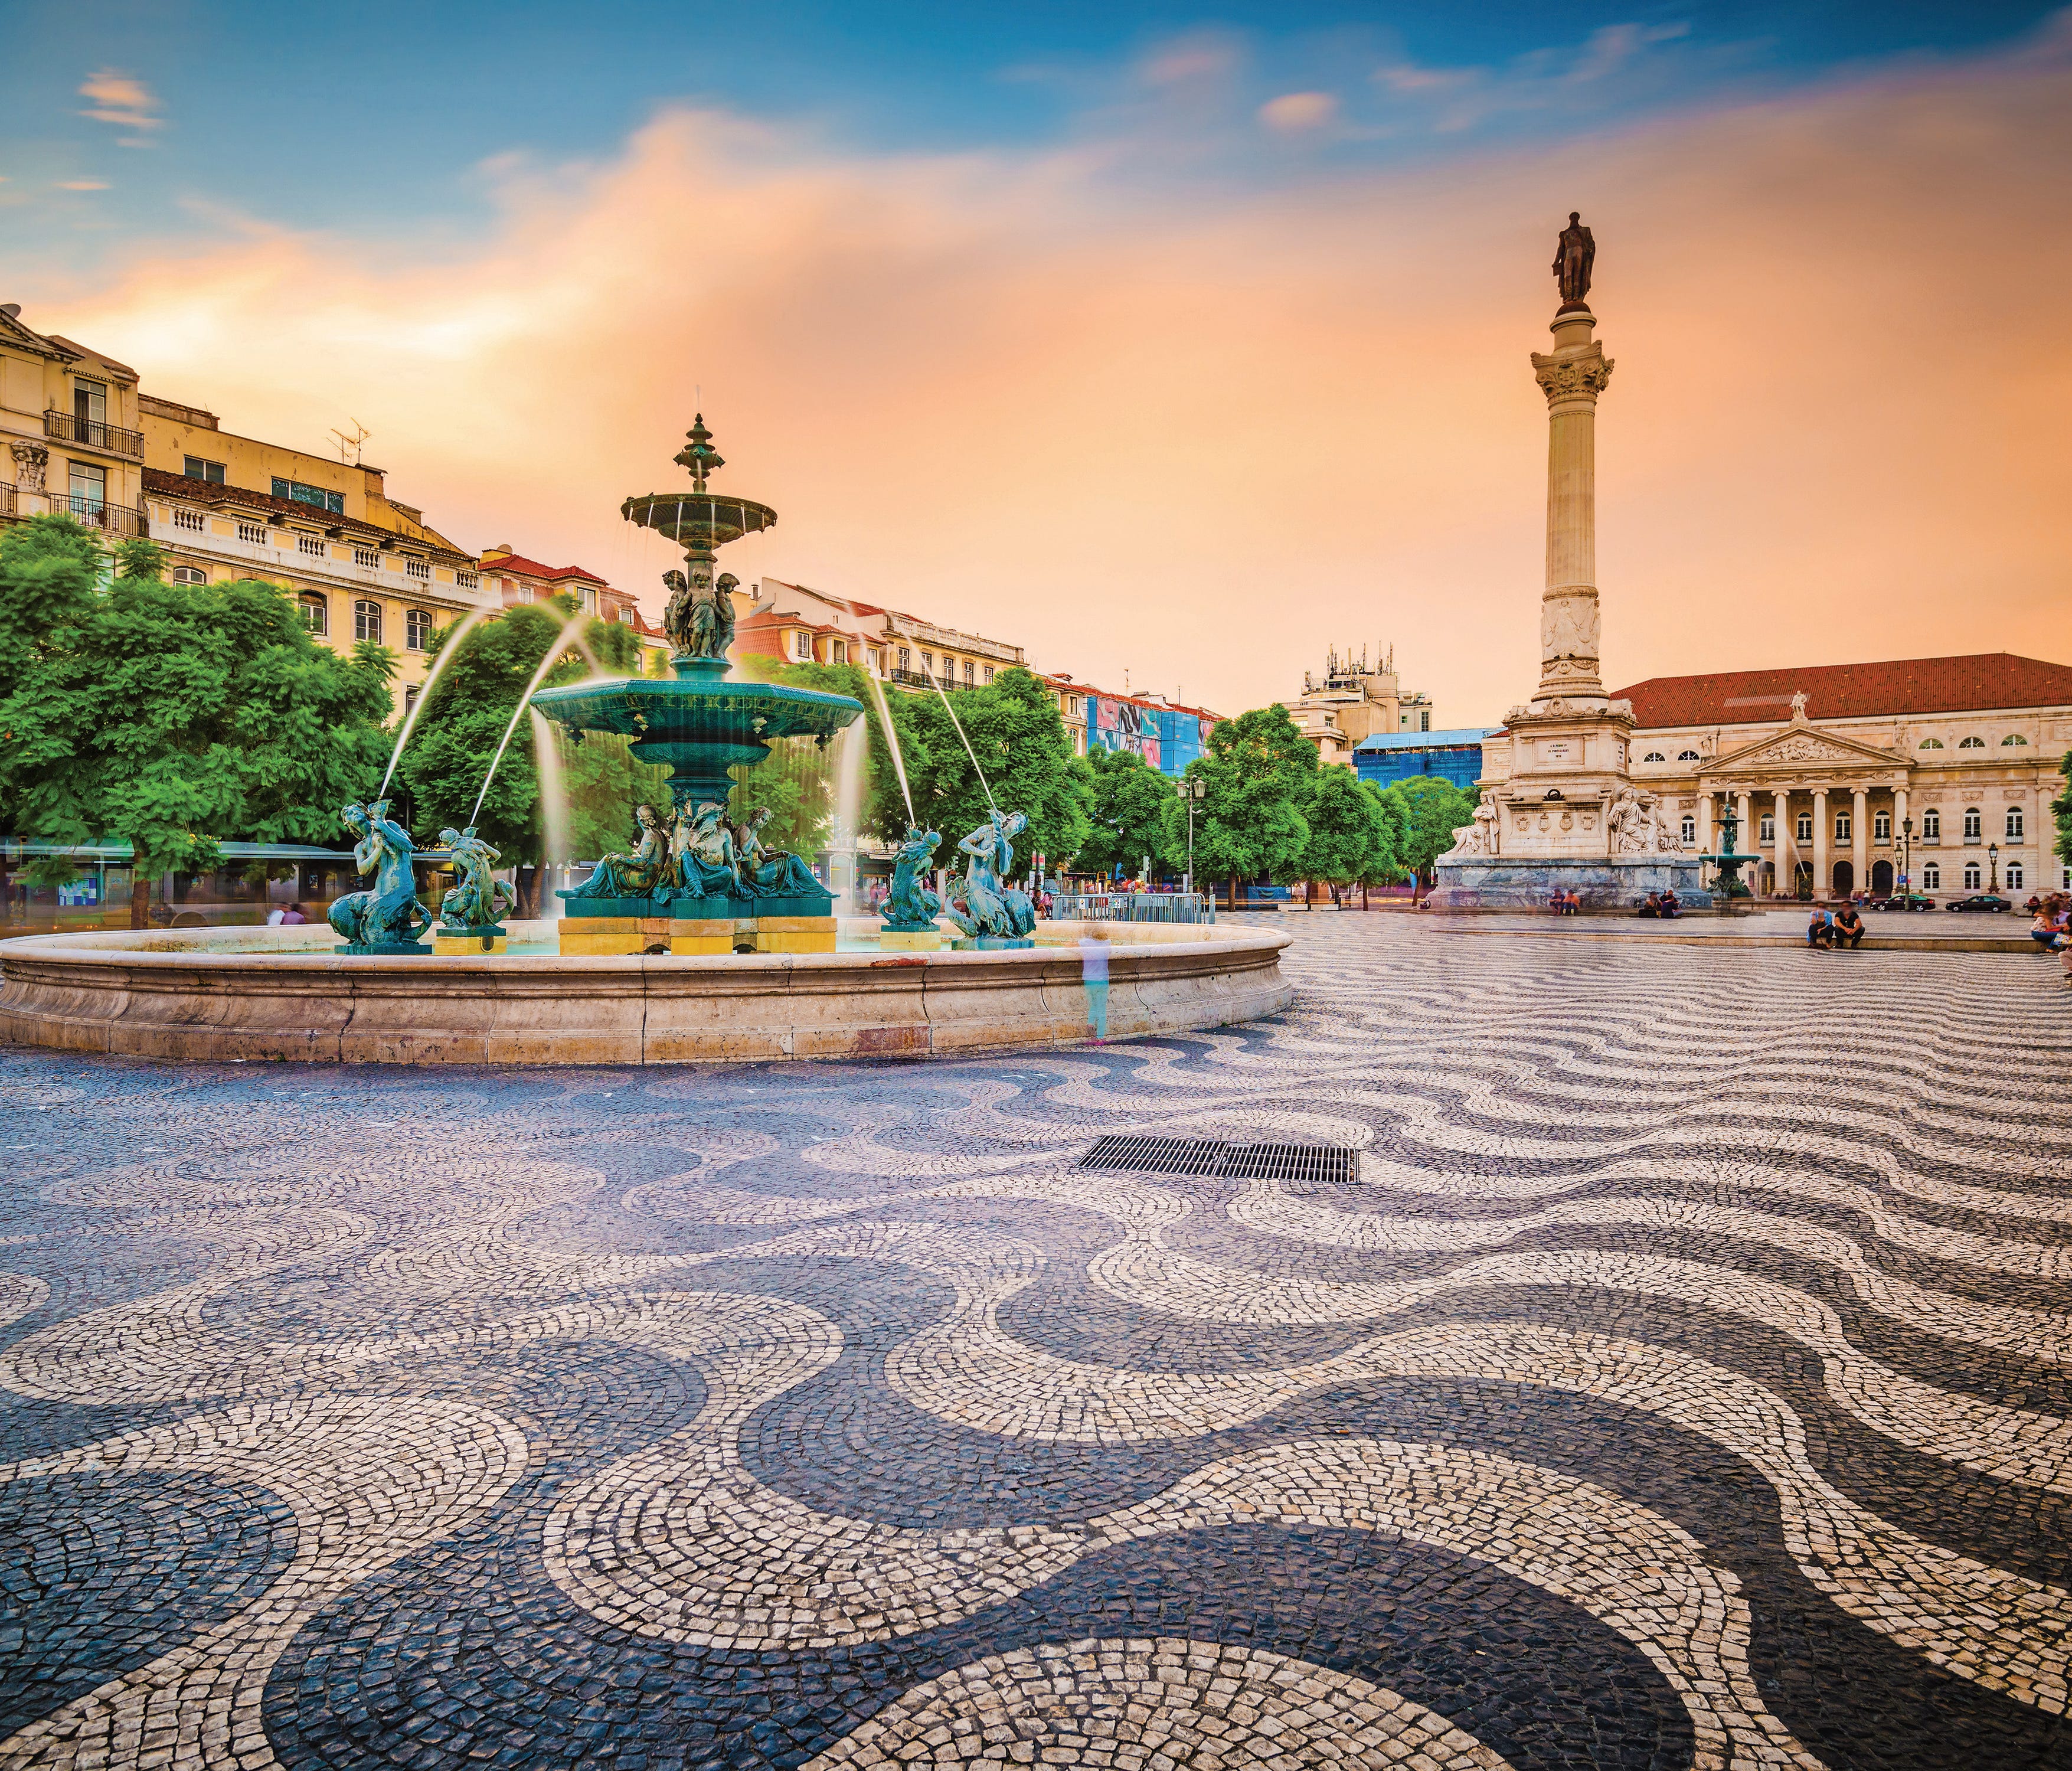 Drink in the atmosphere at Rossio Square, a lively area in Lisbon where people stop to sit and relax.